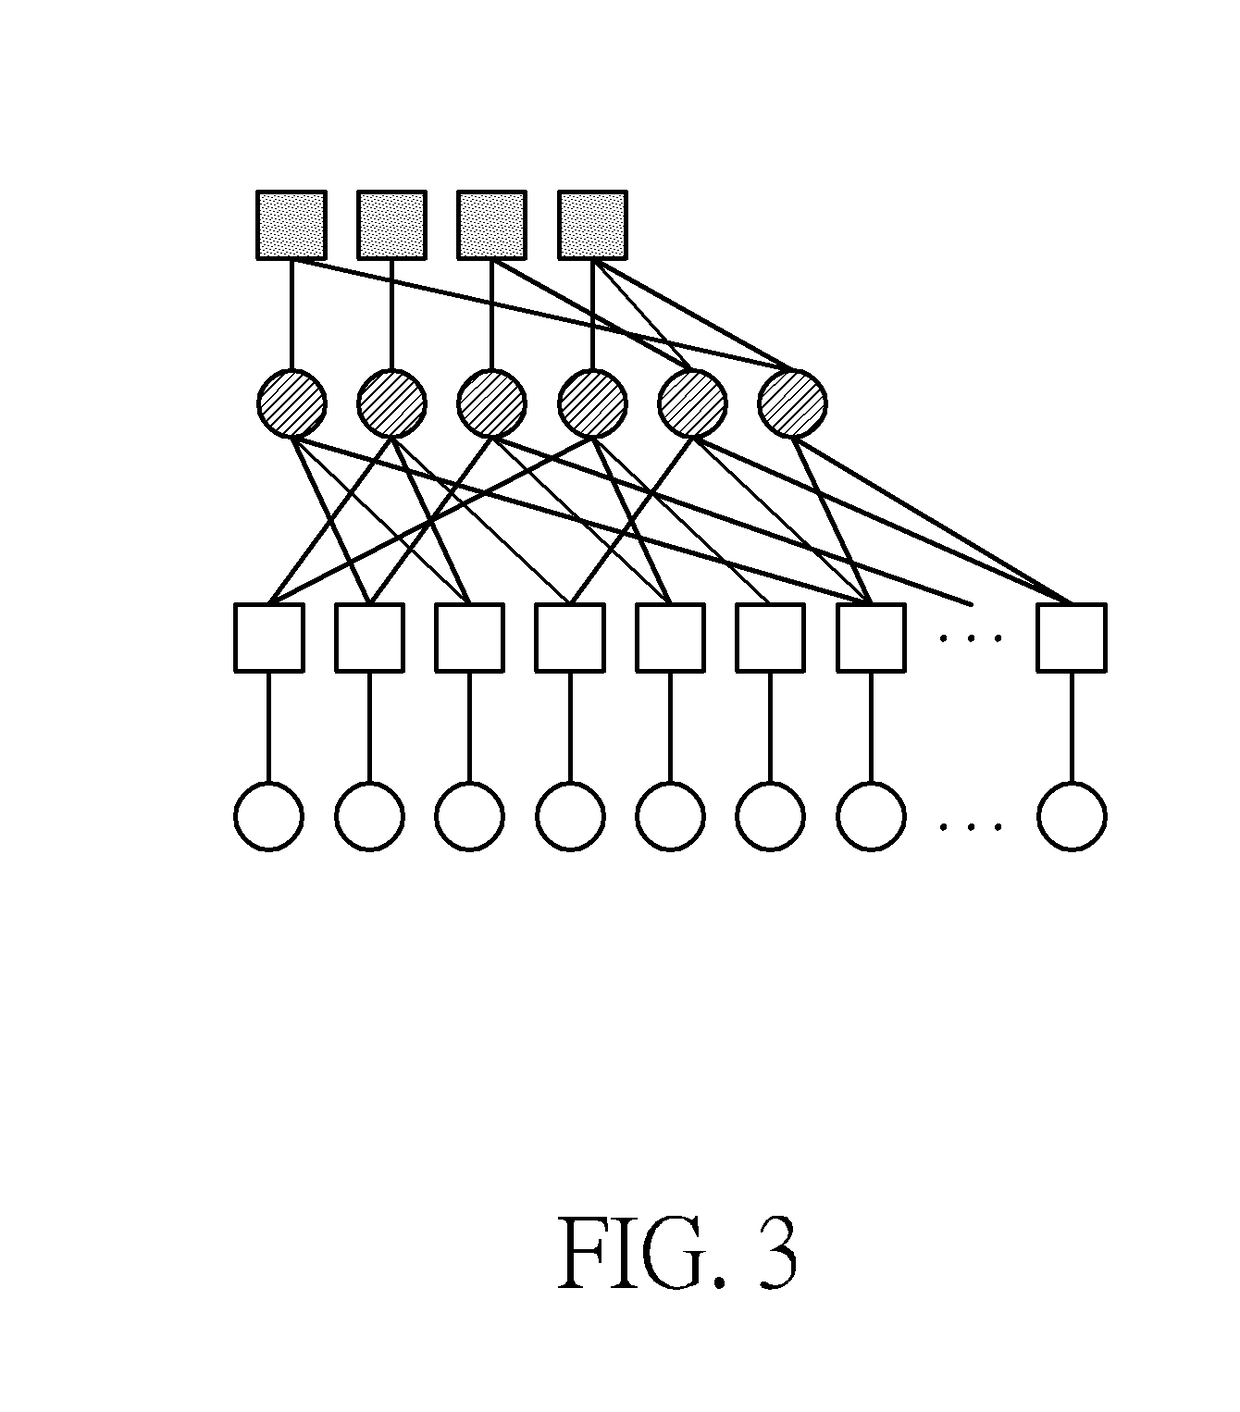 Device and Method of Decoding a Raptor Code